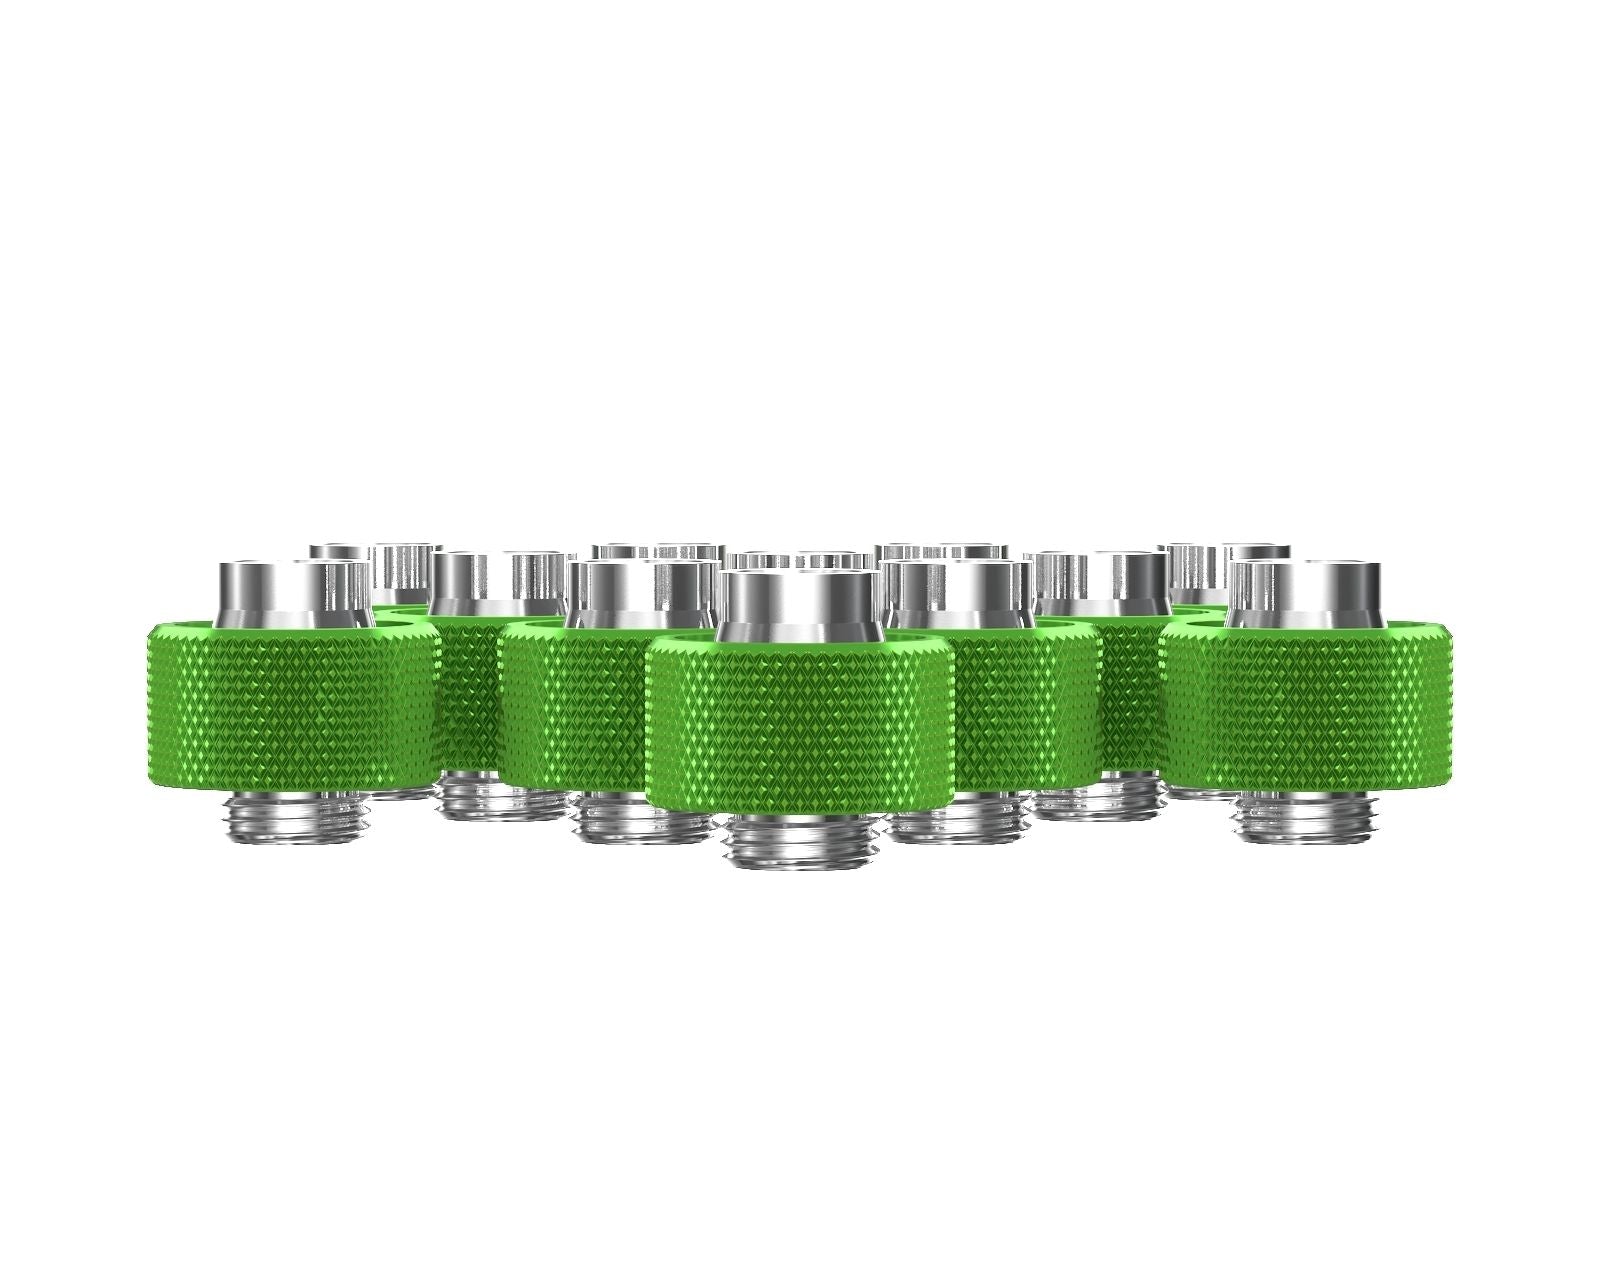 PrimoChill SecureFit SX - Premium Compression Fittings 12 Pack - For 1/2in ID x 3/4in OD Flexible Tubing (F-SFSX34-12) - Available in 20+ Colors, Custom Watercooling Loop Ready - Toxic Candy